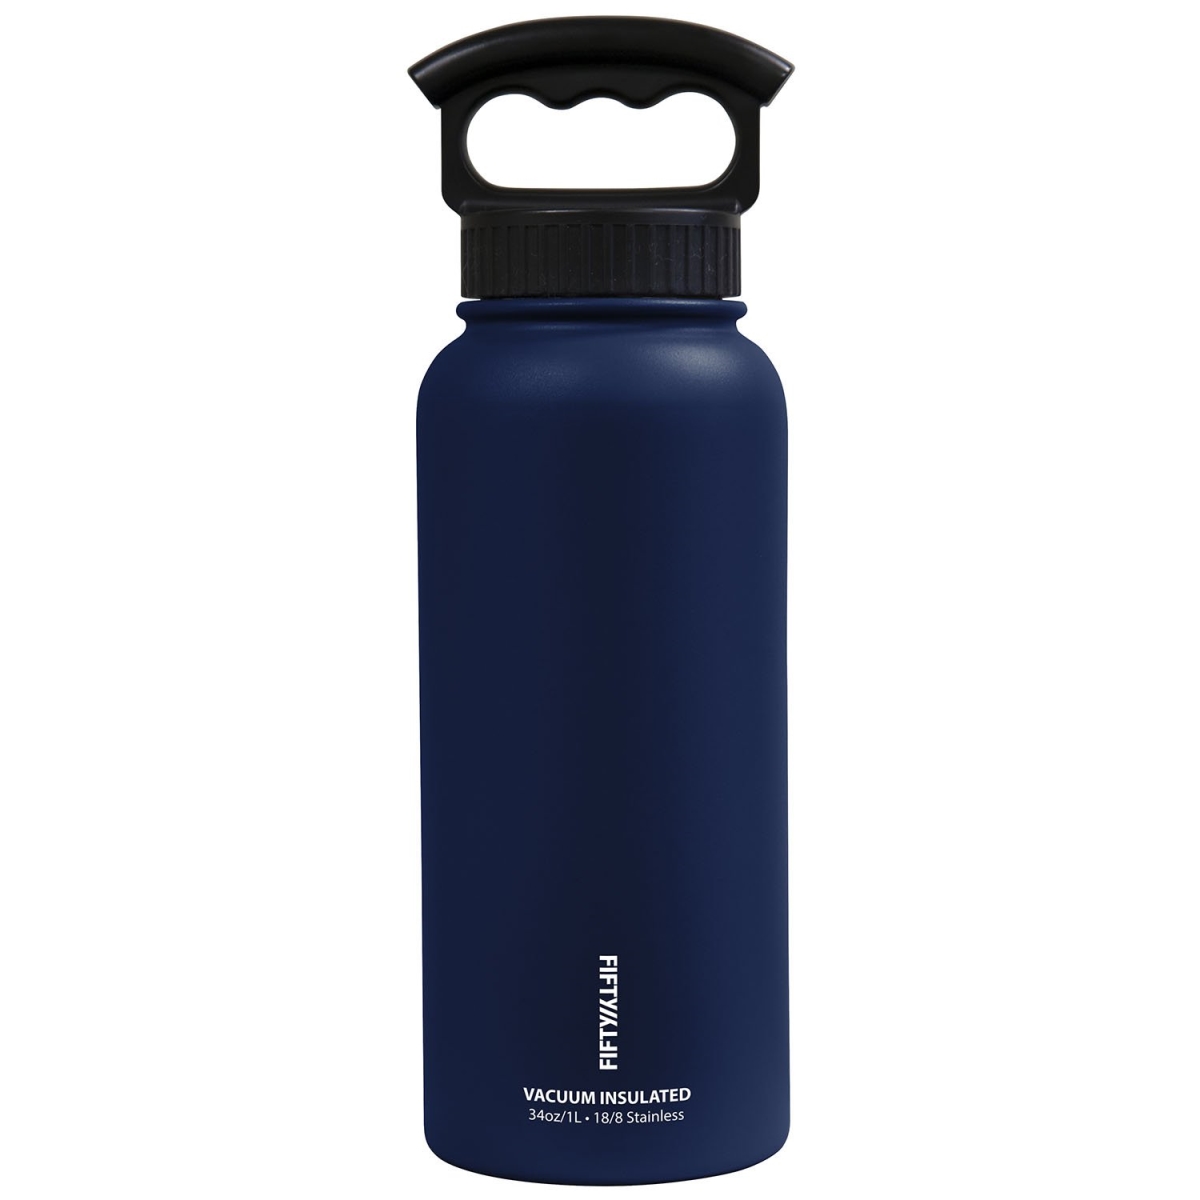 V34001nb0 34 Oz Double-wall Vacuum-insulated Bottles With 3 Finger Grip Cap, Navy Blue